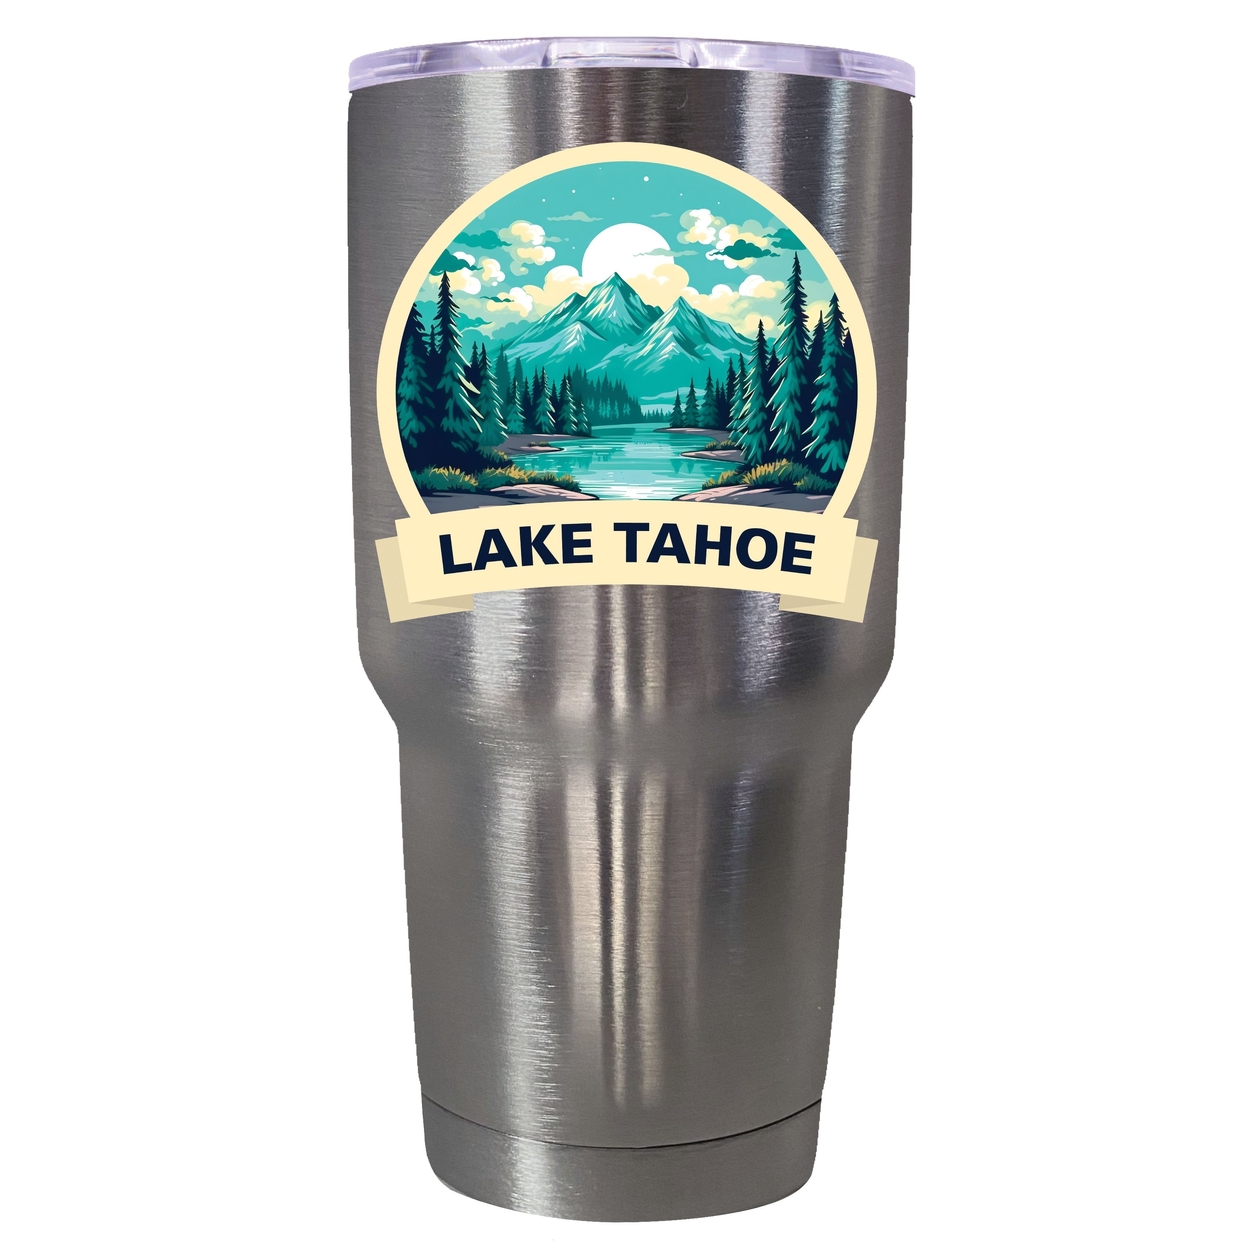 Lake Tahoe California Souvenir 24 Oz Insulated Stainless Steel Tumbler - Stainless Steel,,2-Pack